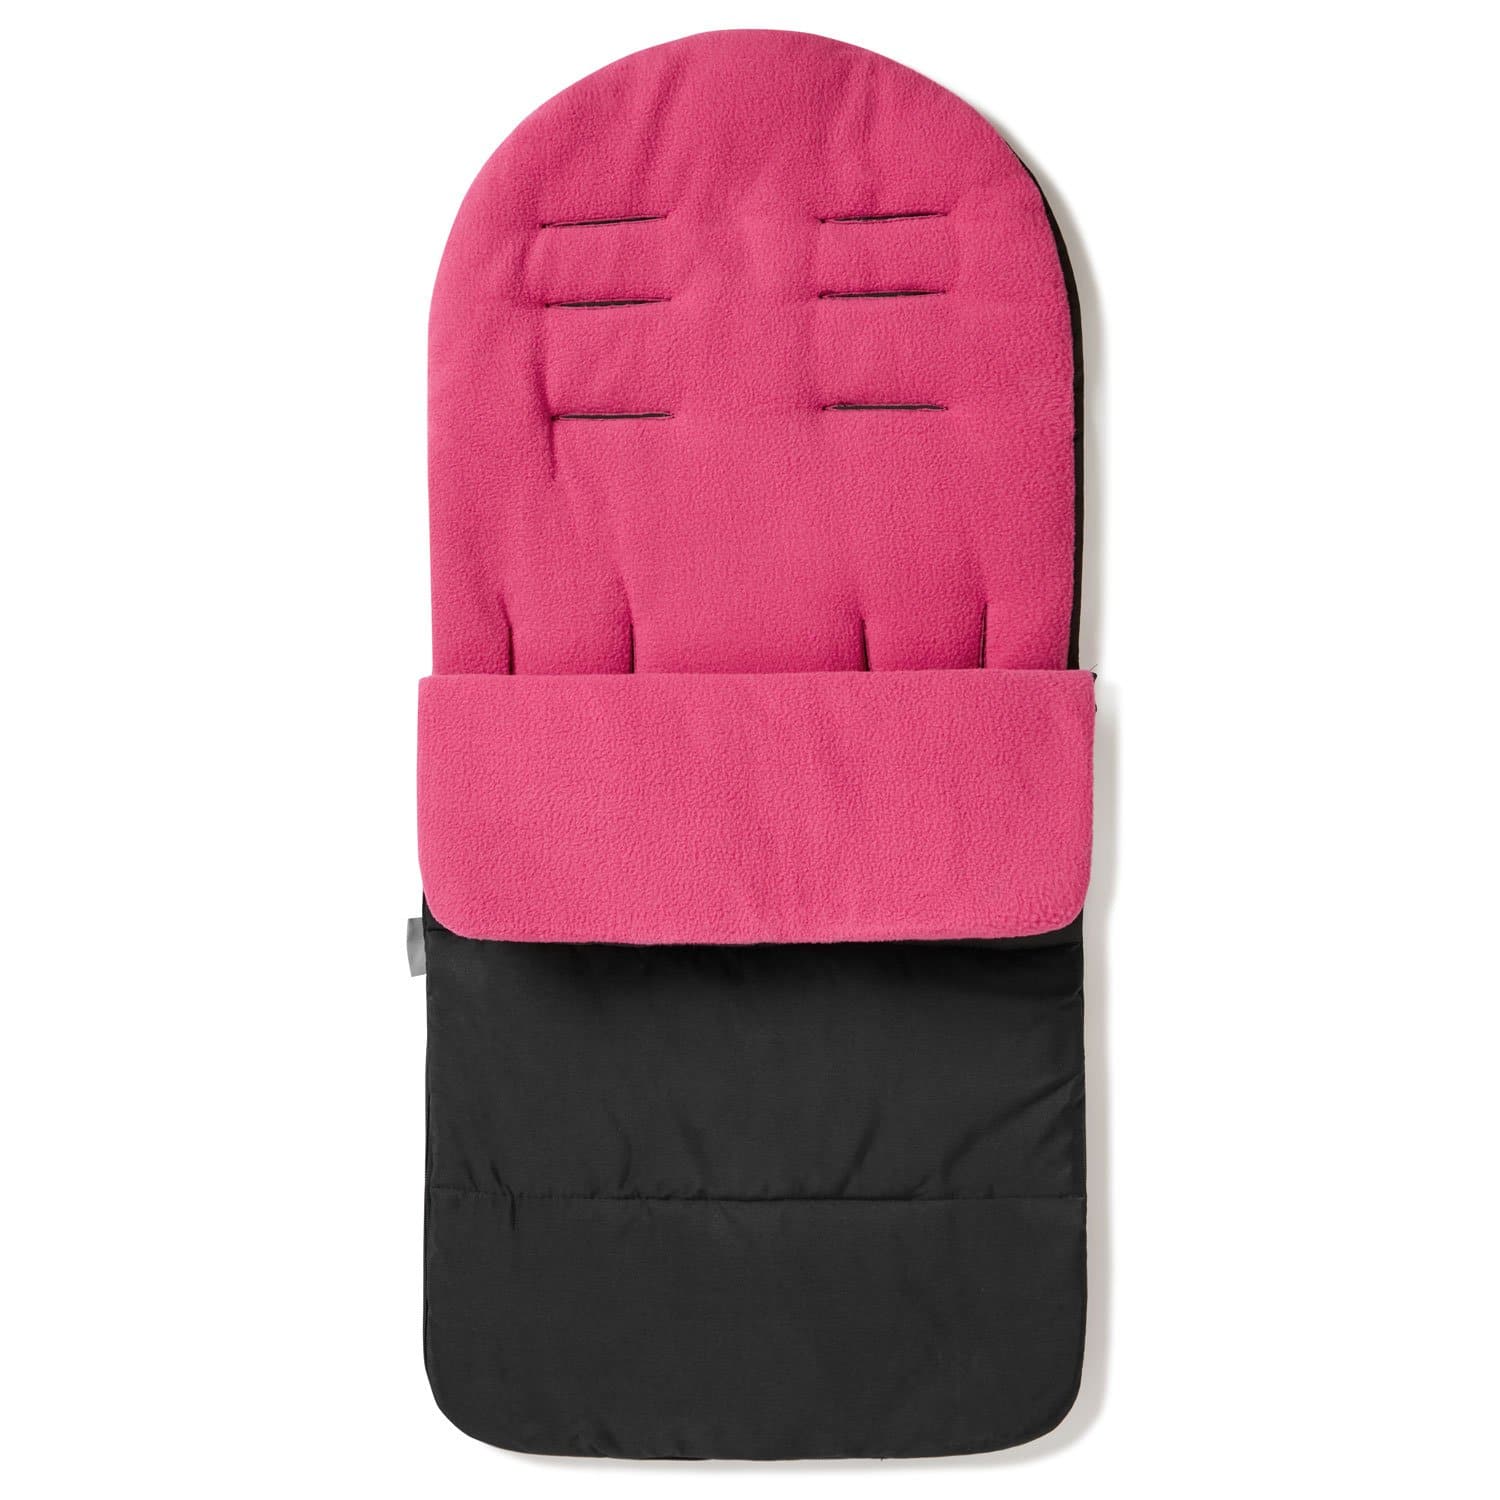 Premium Footmuff / Cosy Toes Compatible with Kiddicare - Pink Rose / Fits All Models | For Your Little One